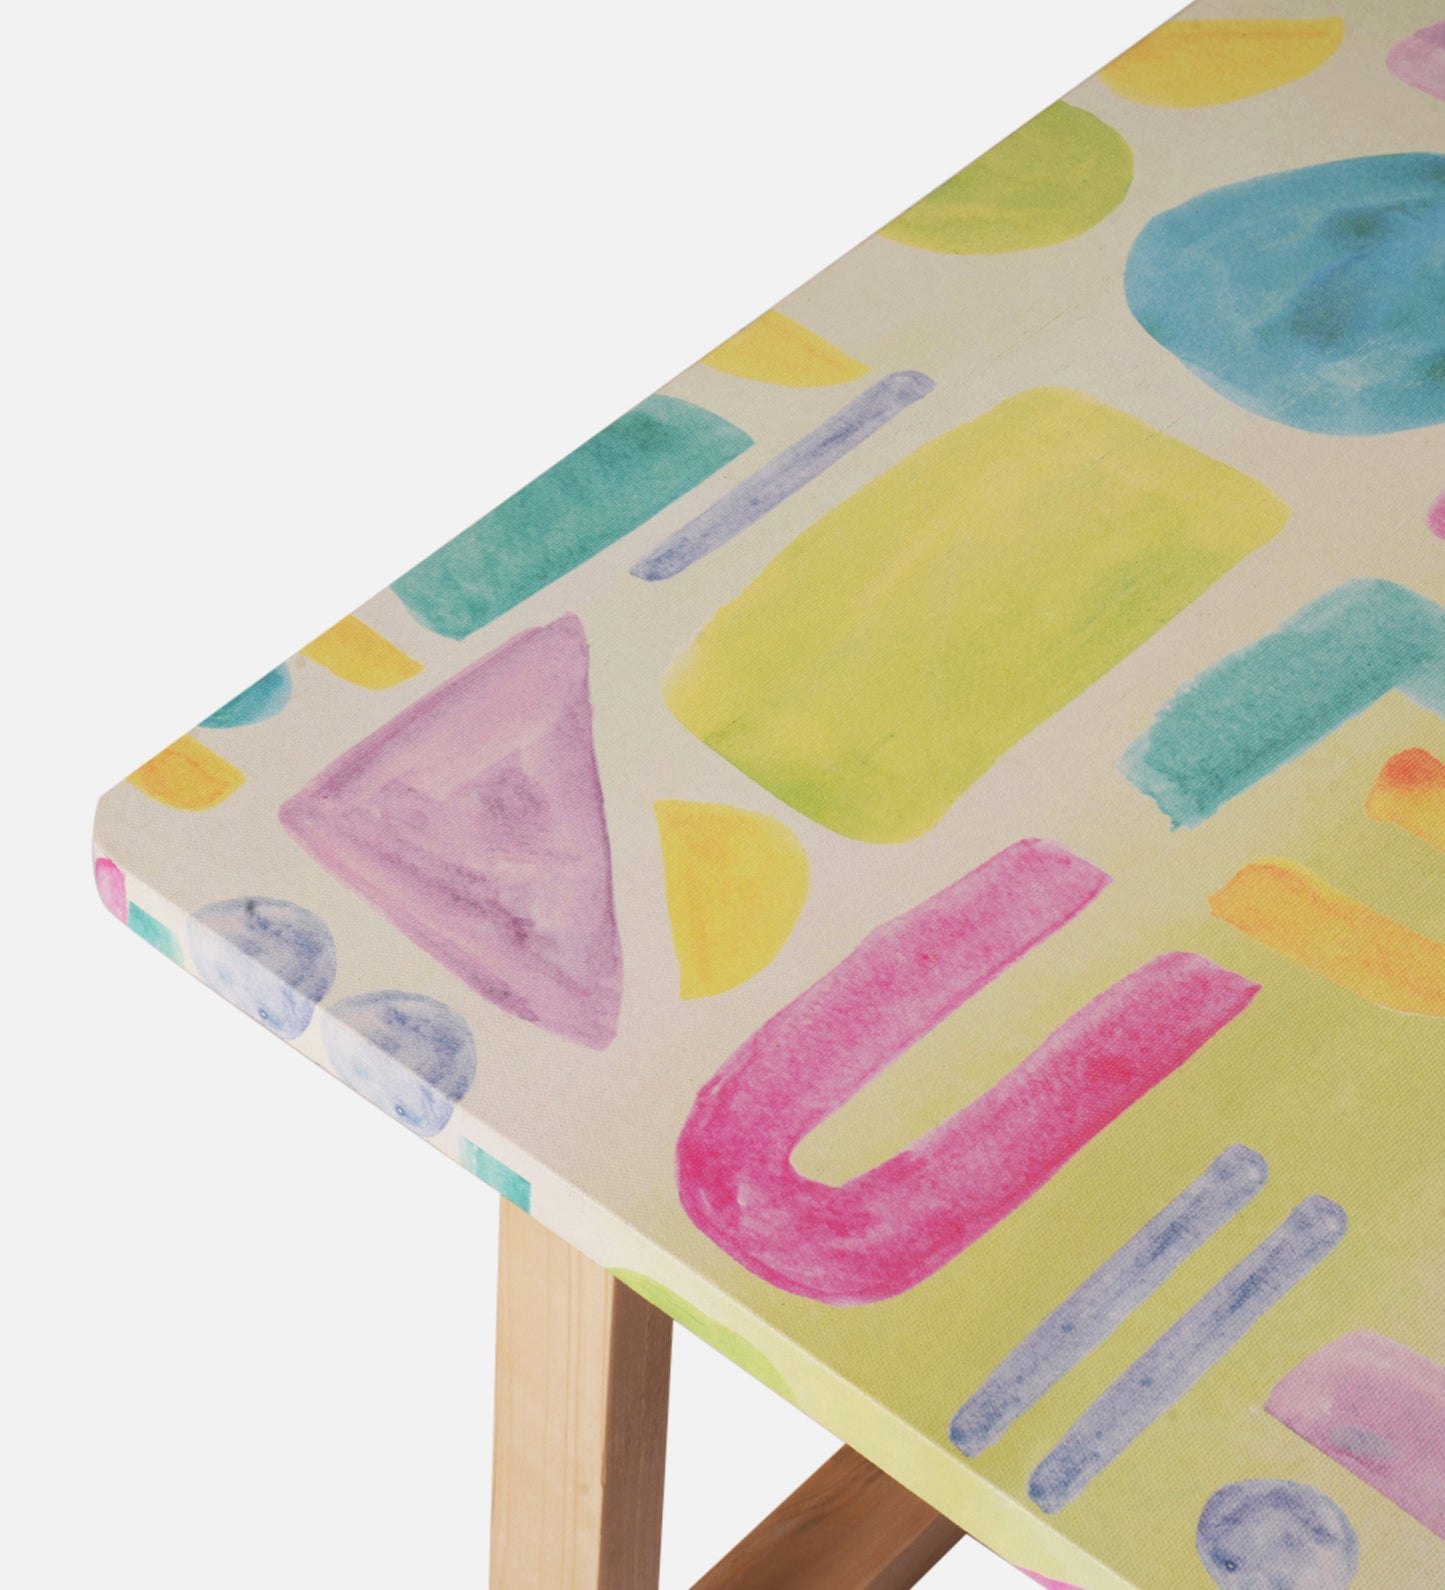 Tiny Doodles Square Coffee Tables, Wooden Tables, Coffee Tables, Center Tables, Living Room Decor by A Tiny Mistake